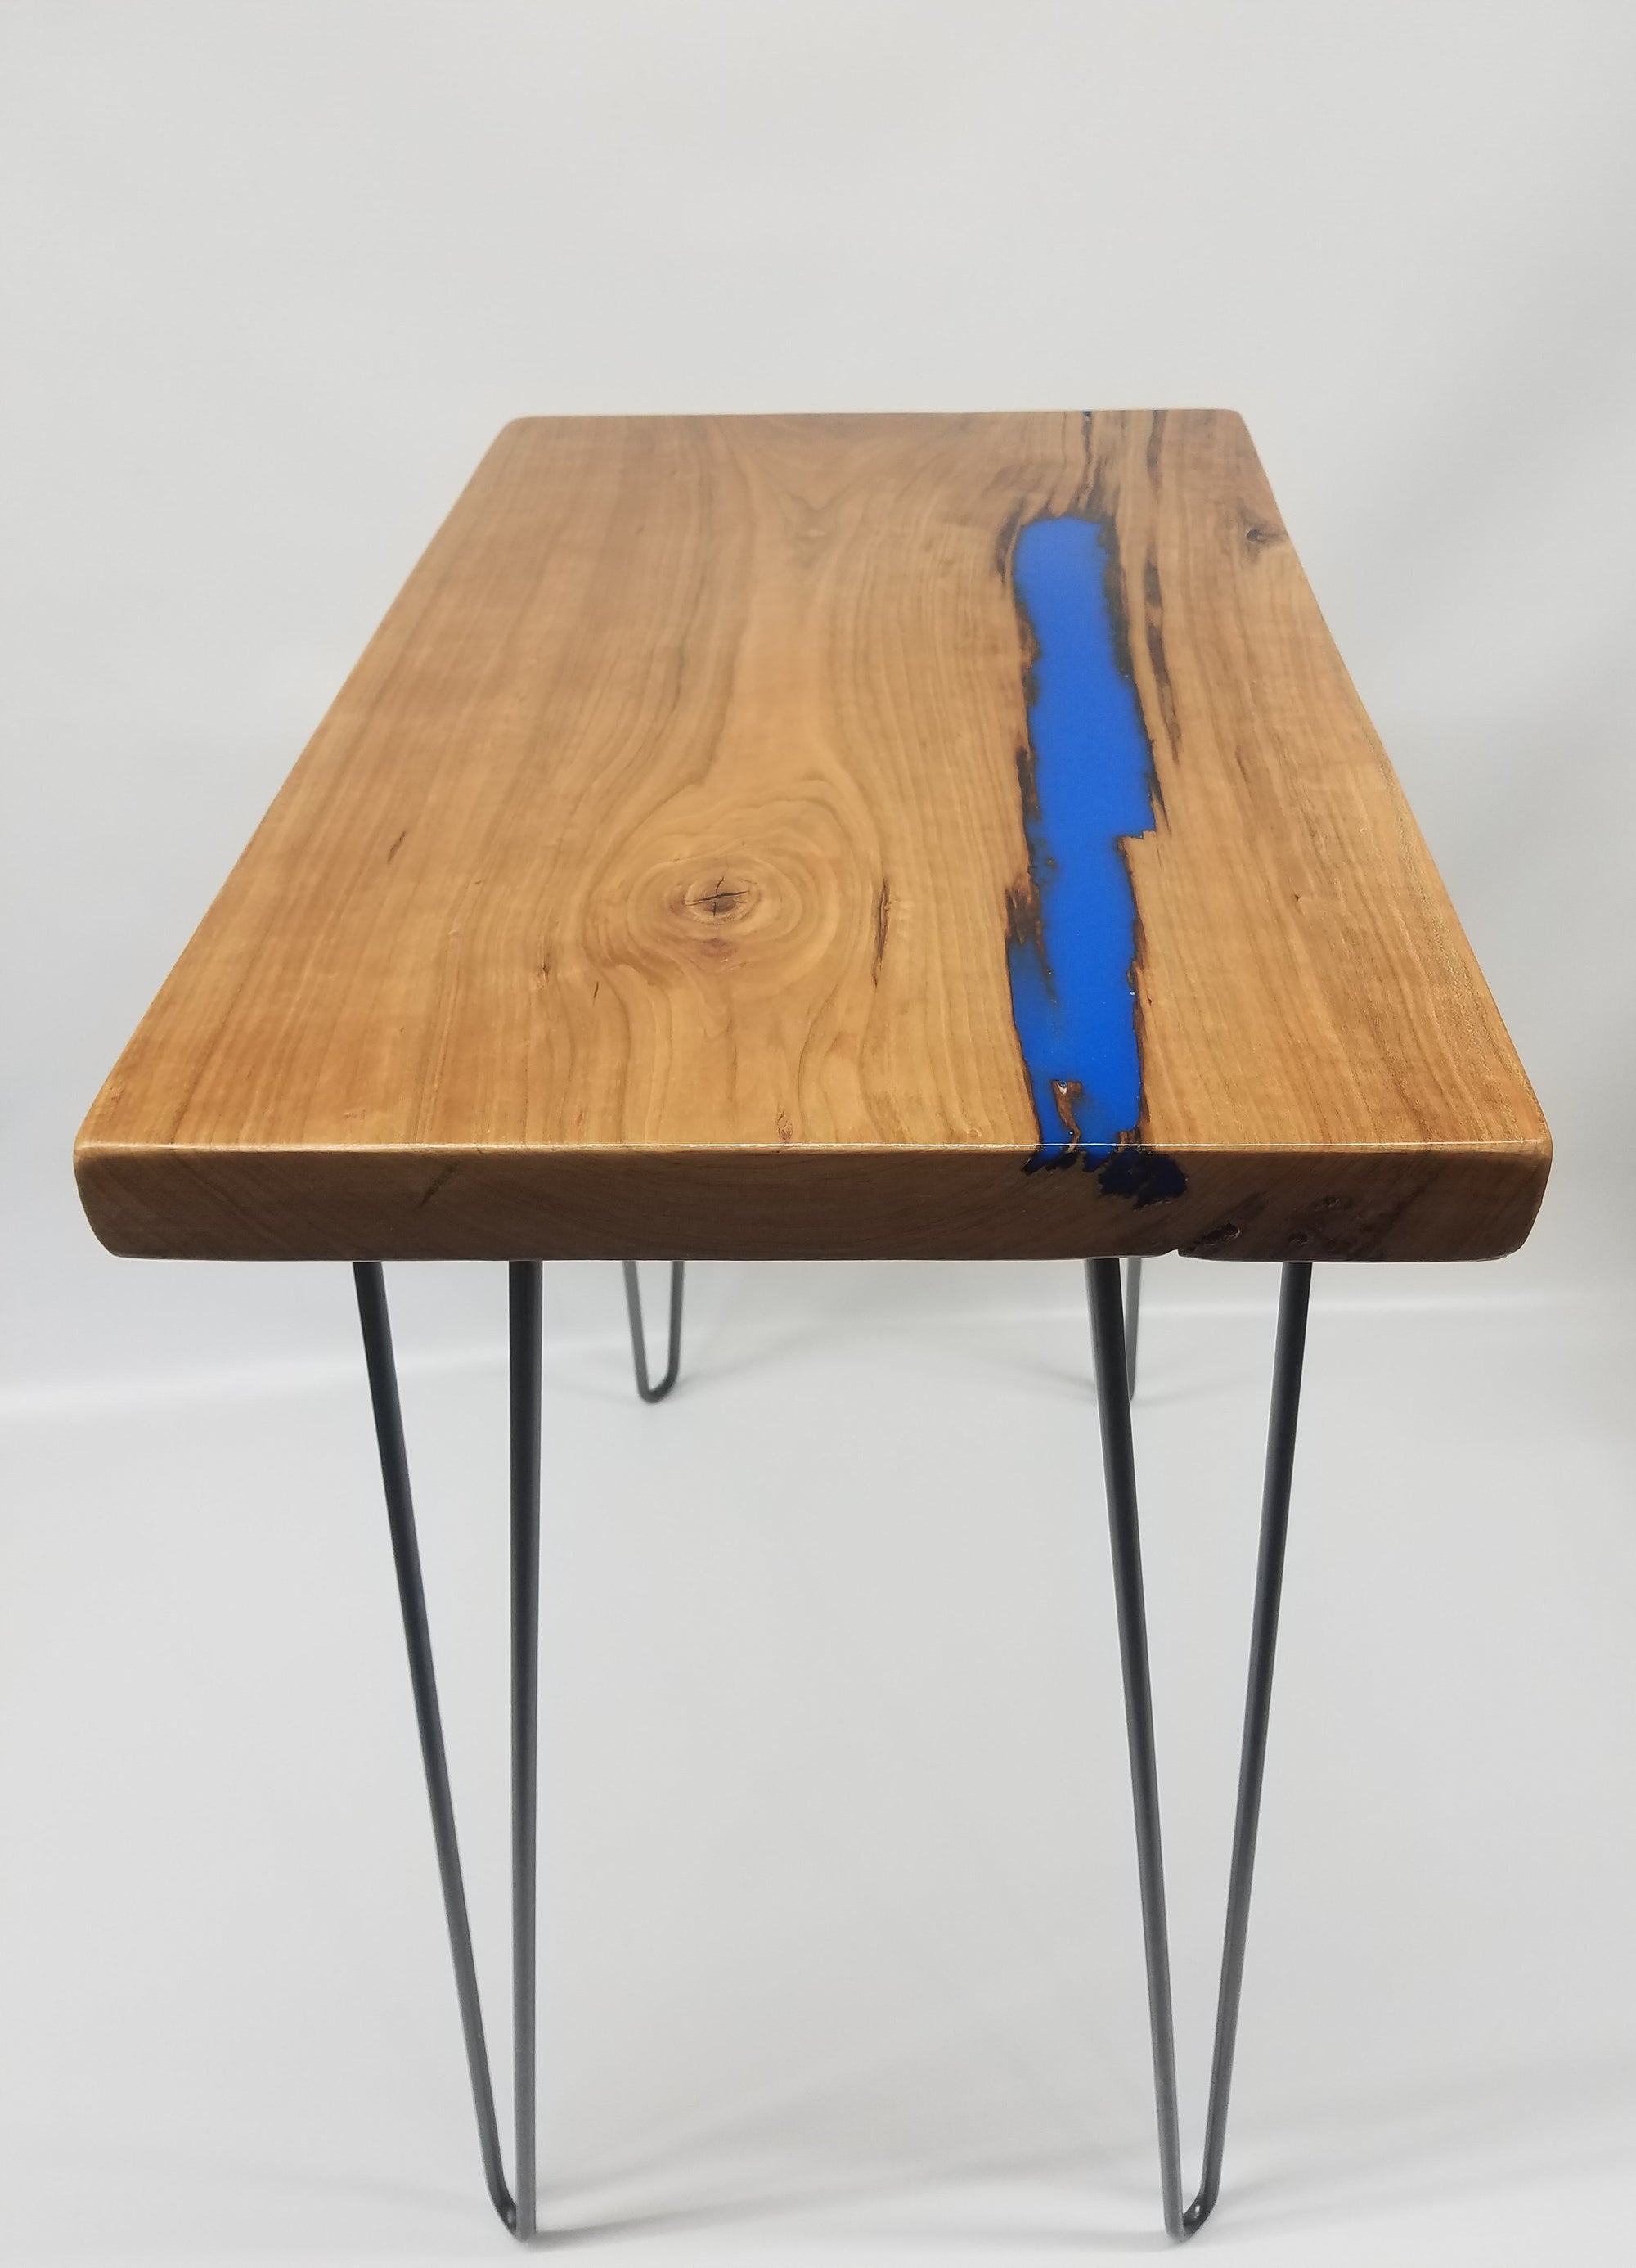 River Table- Side Table- End Table- Reclaimed Wood- Cherry Slab